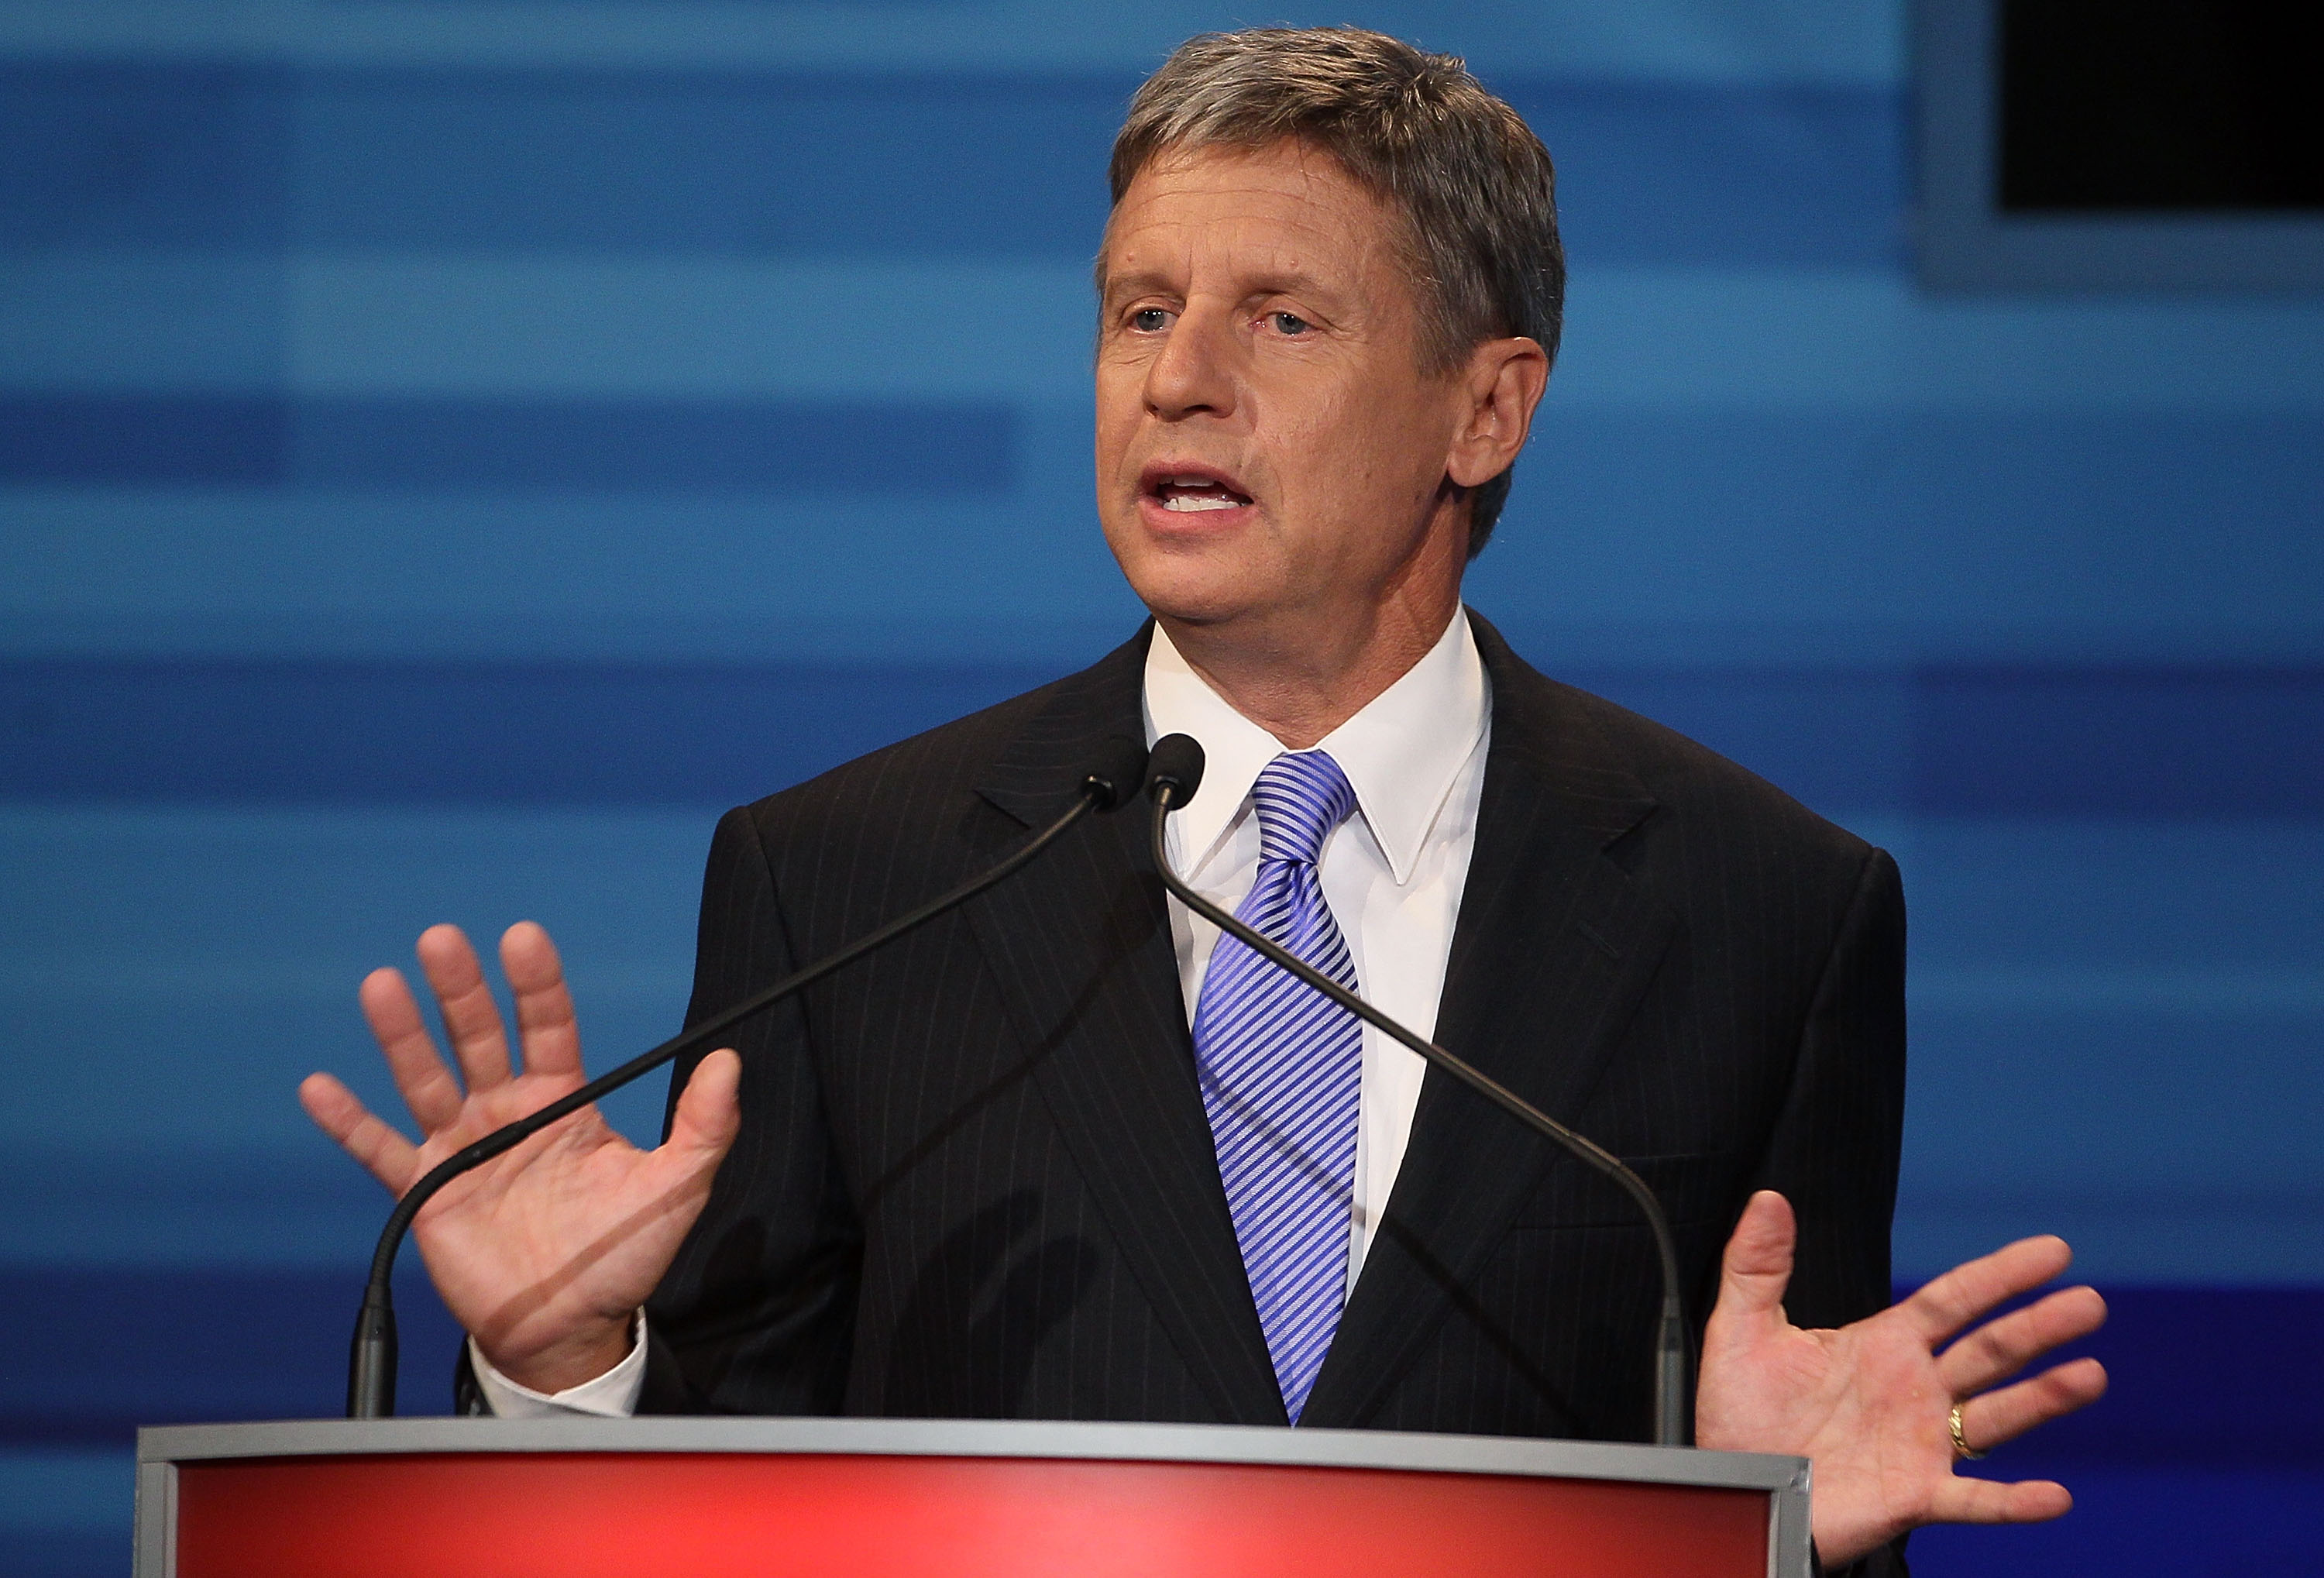 Former New Mexico Gov. Gary Johnson speaks in the Fox News/Google GOP Debate at the Orange County Convention Center on September 22, 2011 in Orlando, Florida. The debate featured the nine Republican candidates two days before the Florida straw poll. 